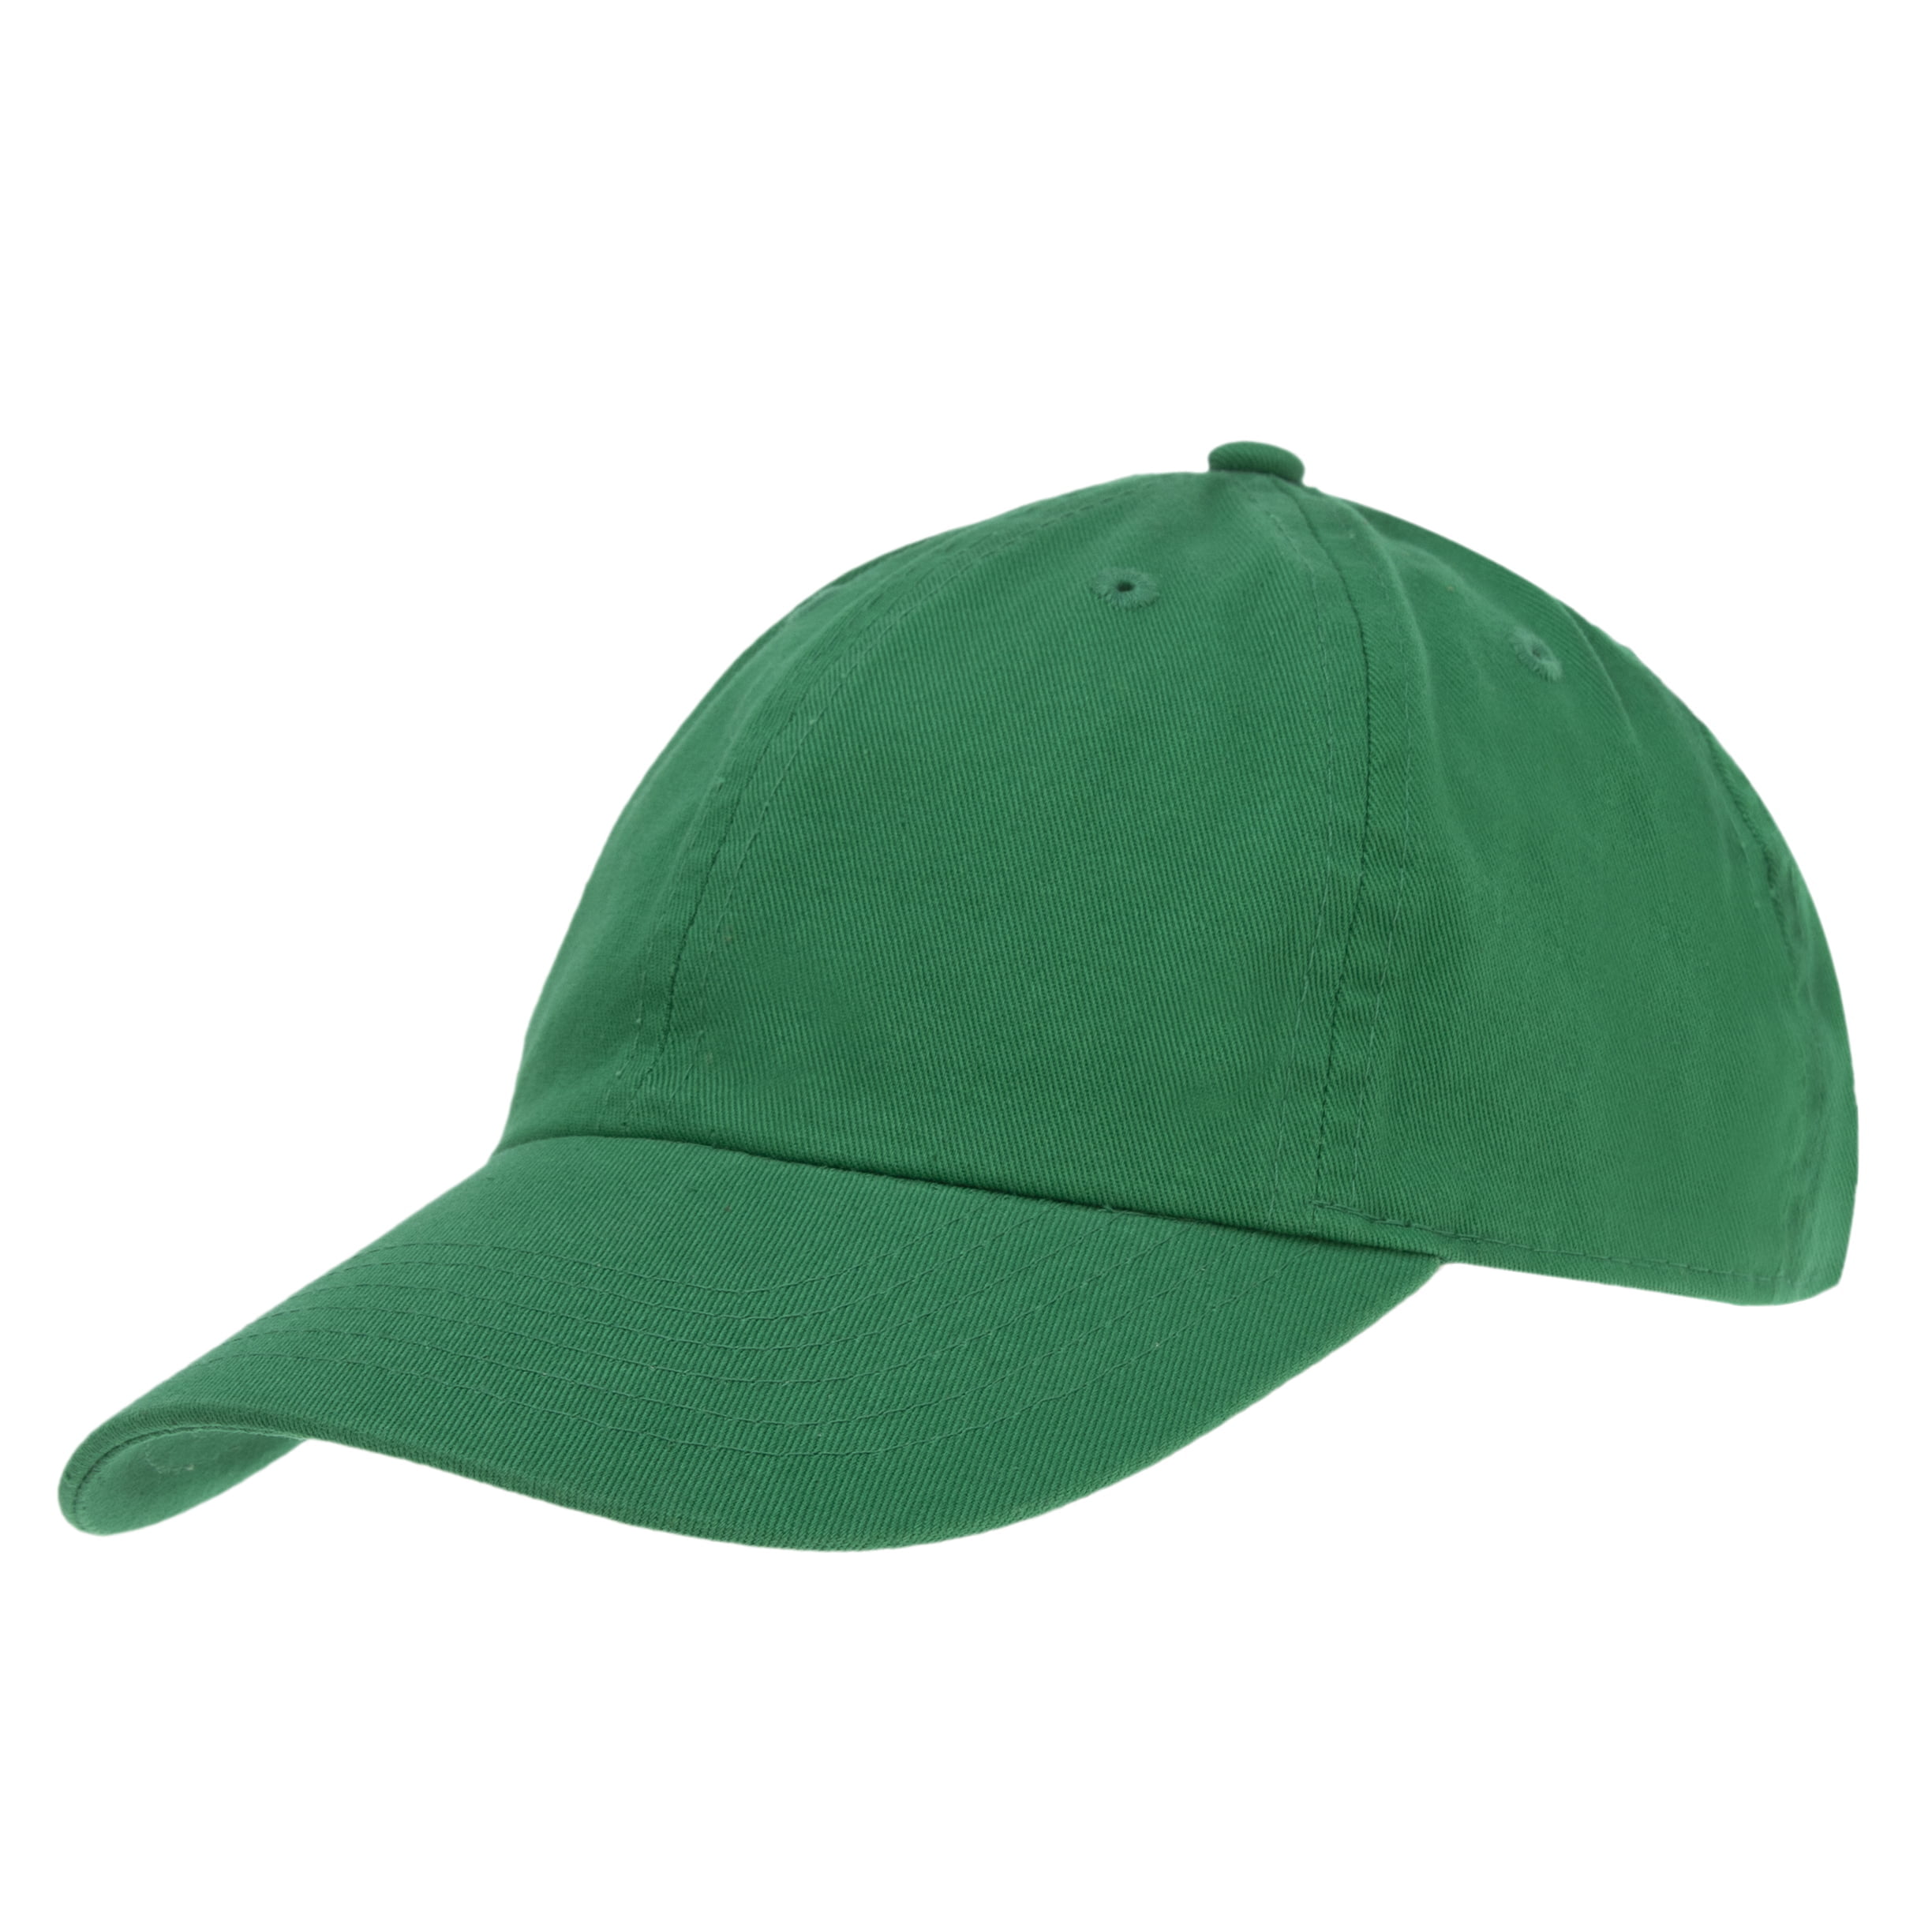 Kelly Green Cotton Cap with adjustable Clasp - Single Piece